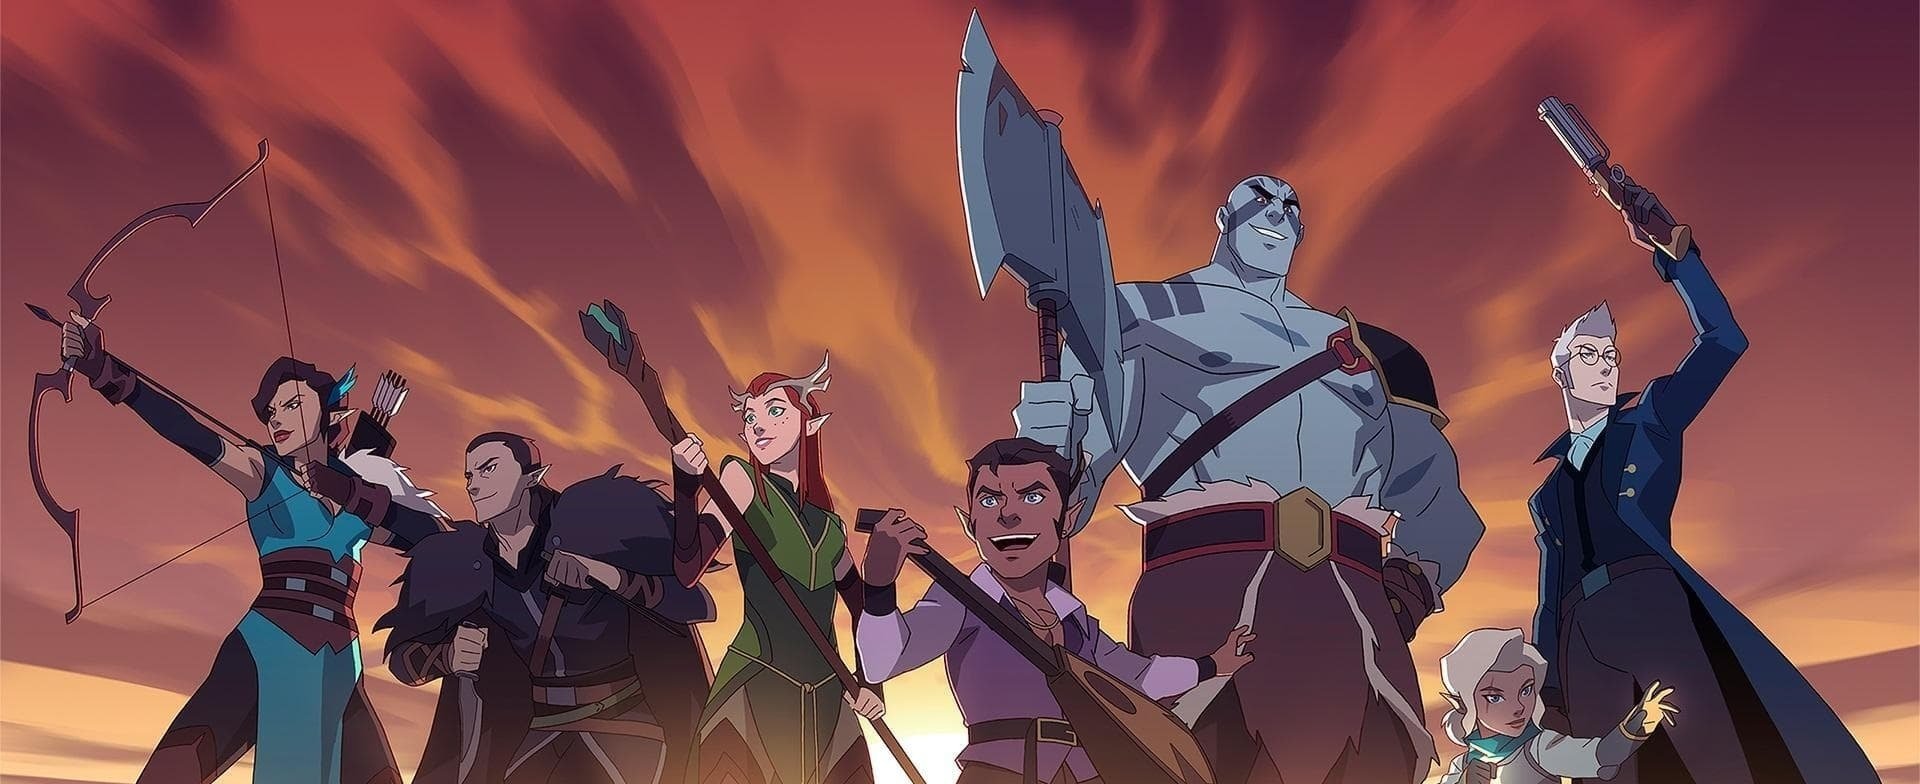 The Legend of Vox Machina - NYCC Live Read with Animation